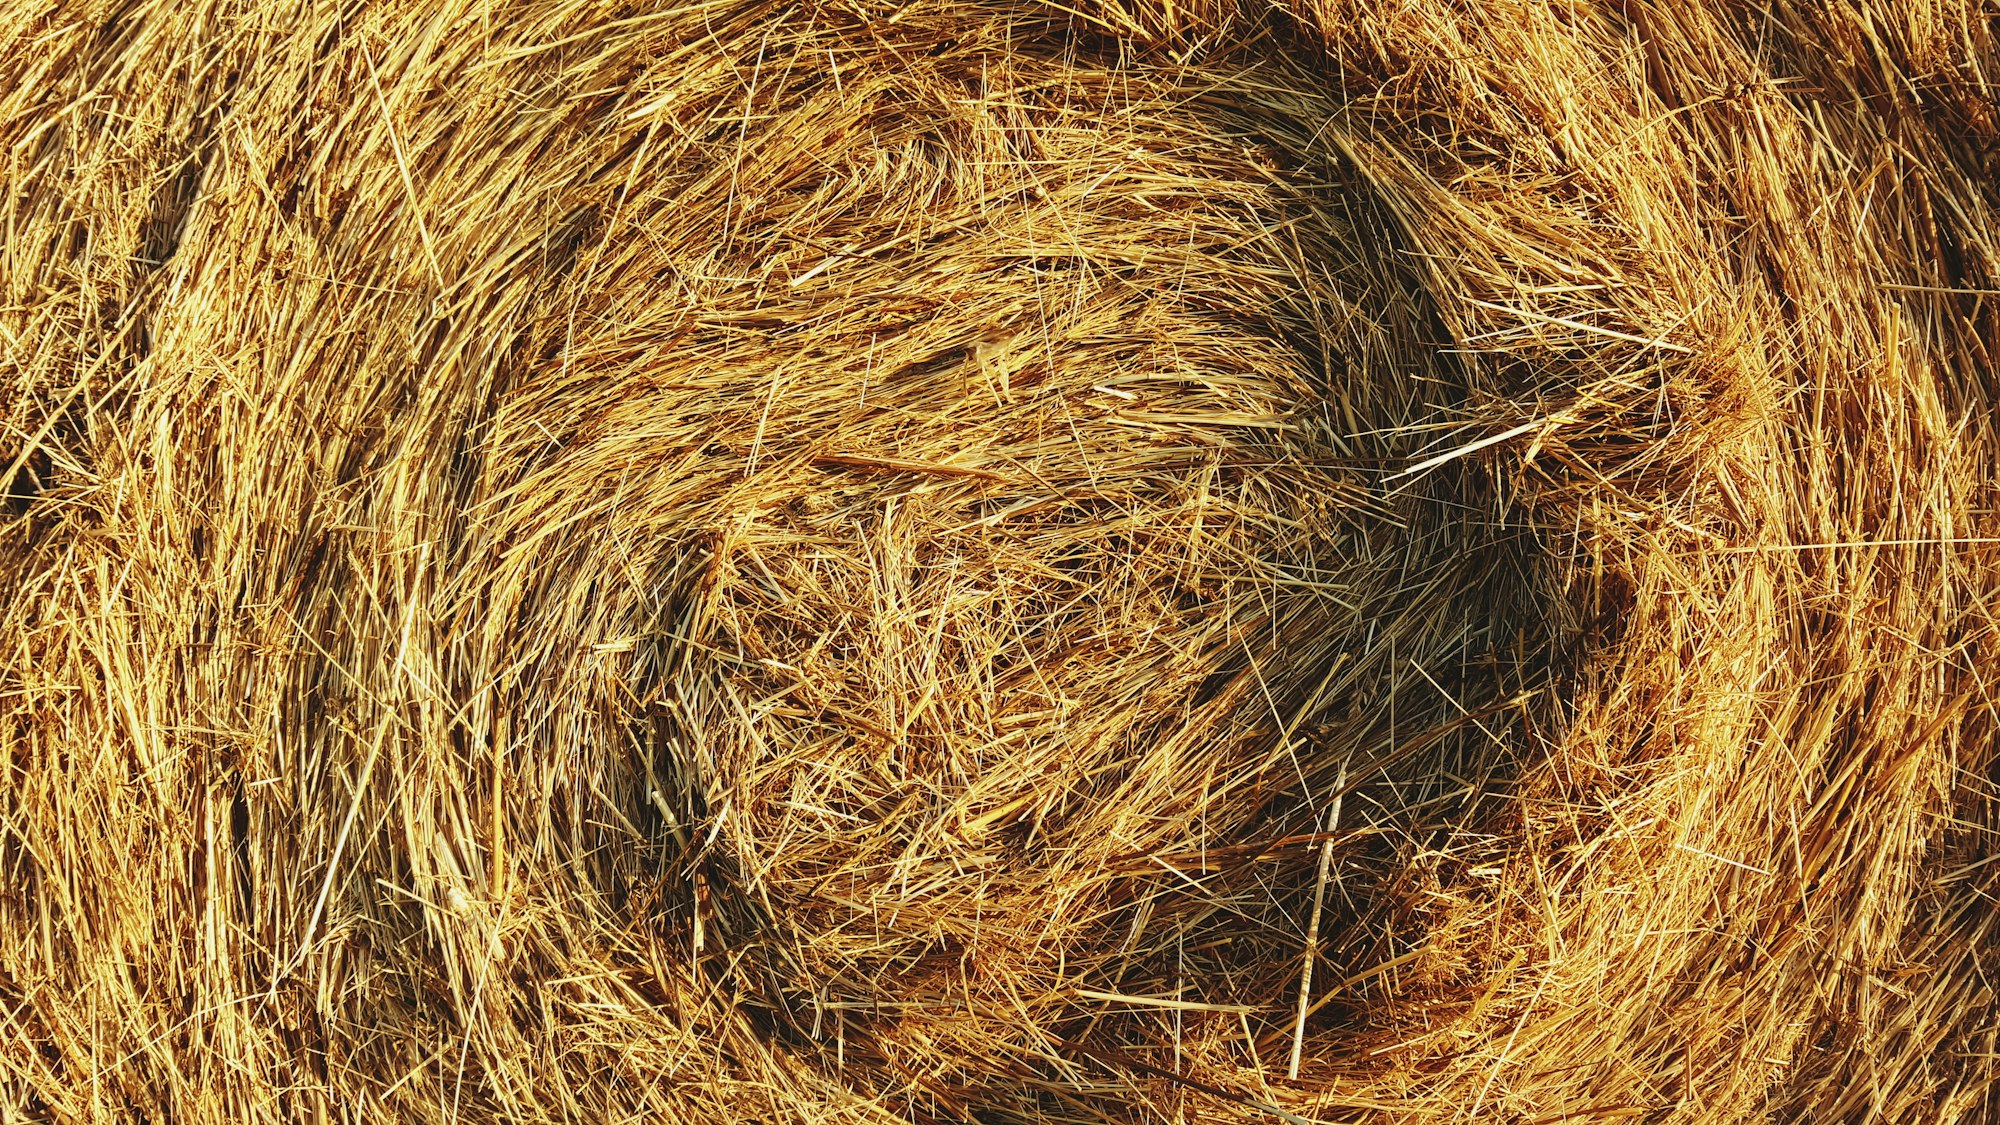 More needles, bigger haystacks: What we mean when we talk about data-driven VC